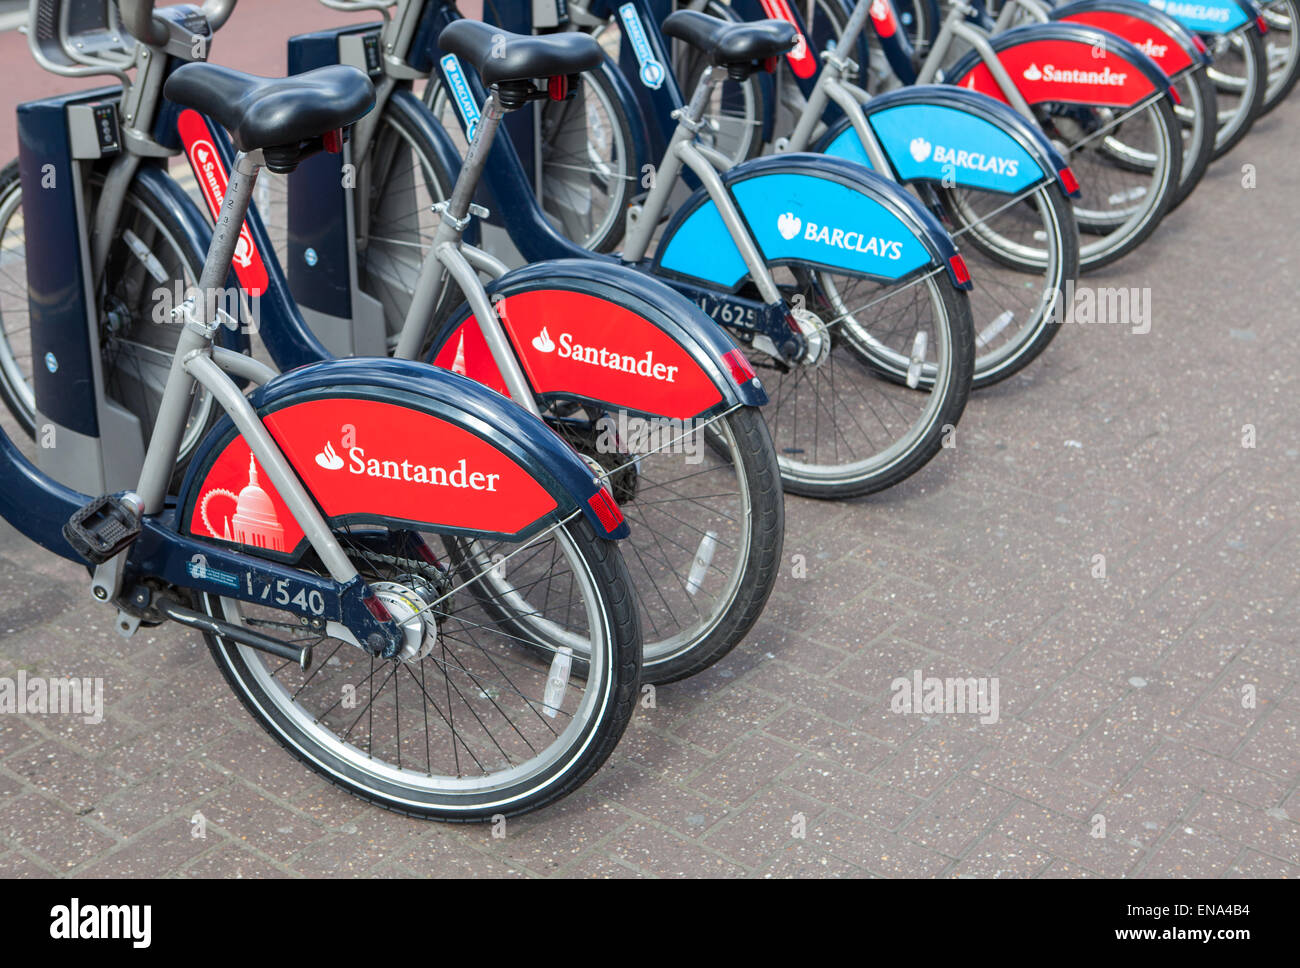 Cycle hire docking station with new bikes sponsored by Santander who are replacing Barclays as main sponsor. Stock Photo